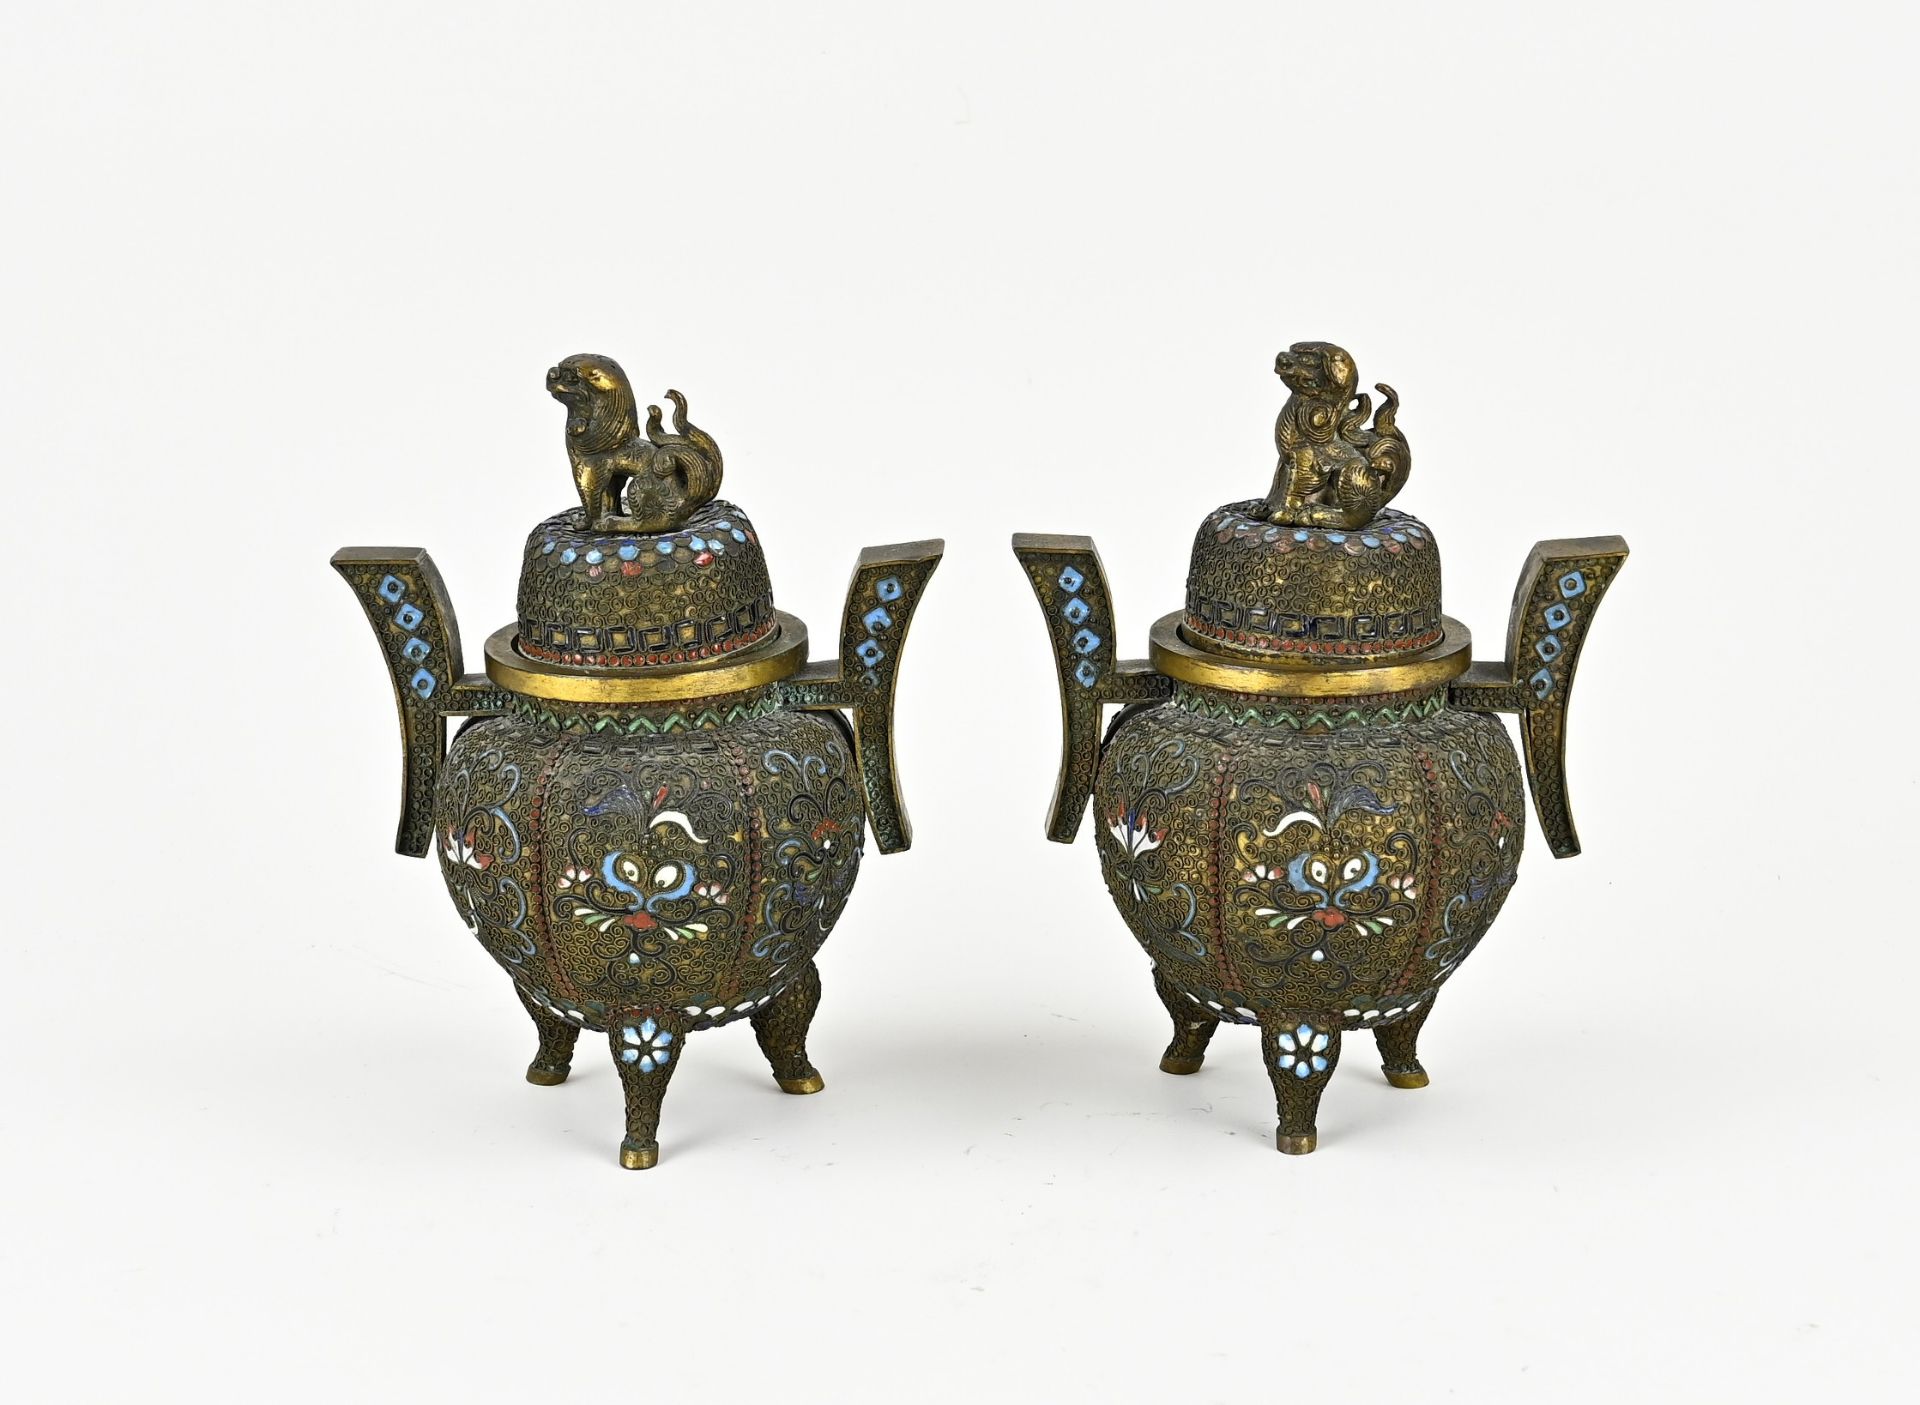 Two Chinese incense burners